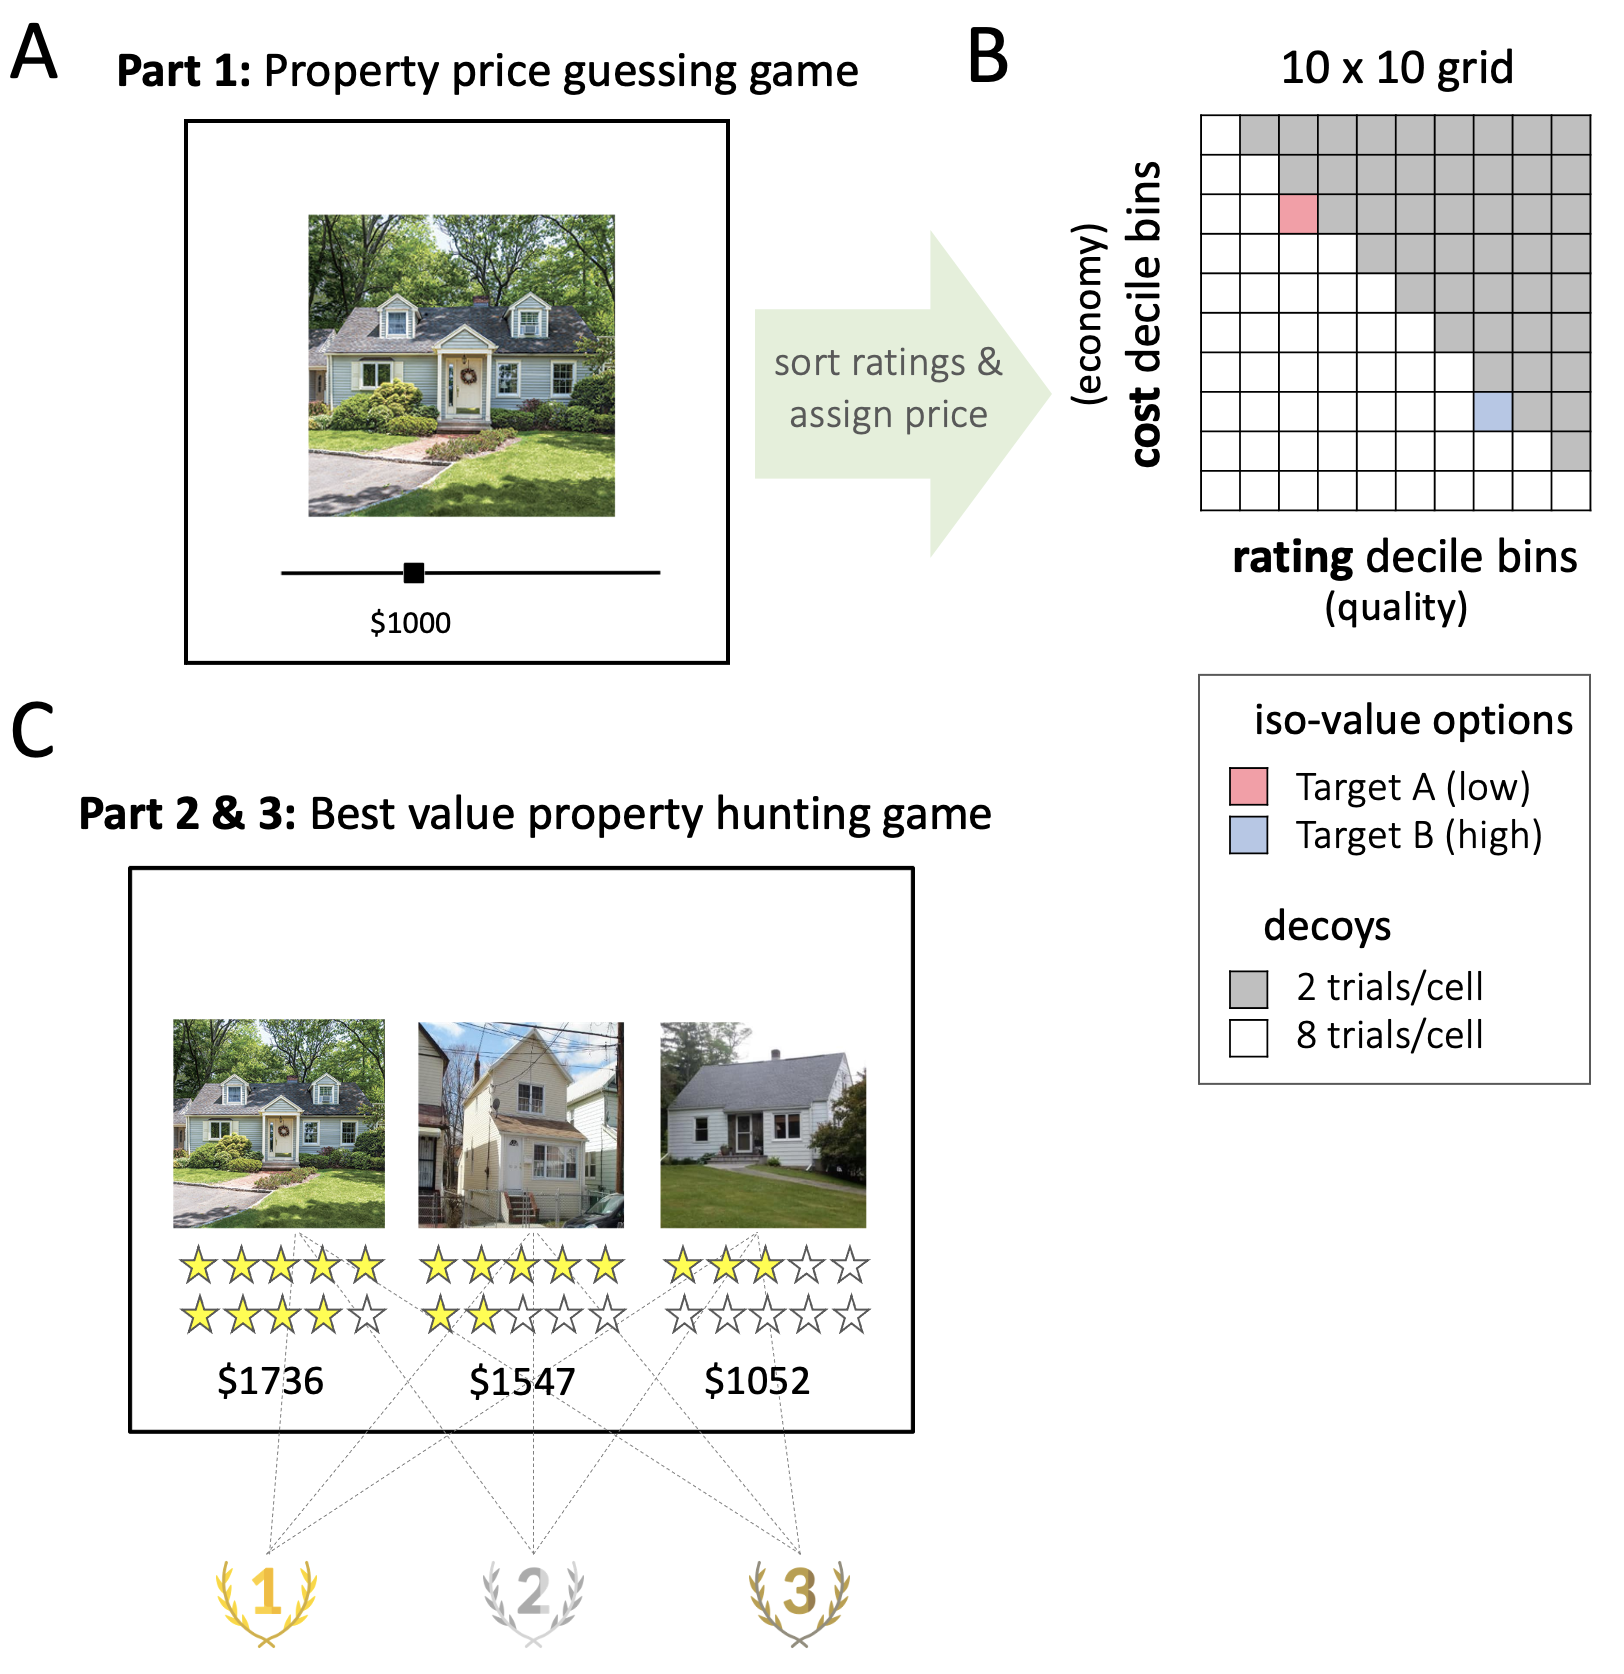 Experimental design. $\textbf{A:}$ Participants first played a “property price guessing game”.  On each trial they estimated the monthly rental value (in dollars) of a residential property, using a sliding scale. $\textbf{B:}$ After discarding properties with inconsistent responses, ratings were sorted into deciles for each participant. These bins were used to select stimuli for targets A and B (deciles 3 and 8 of estimated ratings; red and blue squares), and decoy stimuli. Each choice task stimulus was created by matching a property with a given decile estimated value (quality; attribute $j$) to a new rental price (economy; attribute $i$) on a 10x10 grid. Eight property/price combinations were generated for each cell in the grid that lay below the diagonal (white cells), and 2 property/price combinations for each cell above the diagonal (grey cells). $\textbf{C:}$ Participants then played a “best value property hunting game” in which they were asked to rank 3 stimuli according to their economy/quality trade off. Two of the stimuli corresponded to the targets A and B, the third stimulus was the decoy. A star rating system was used as a reminder of their previous price estimation judgment.